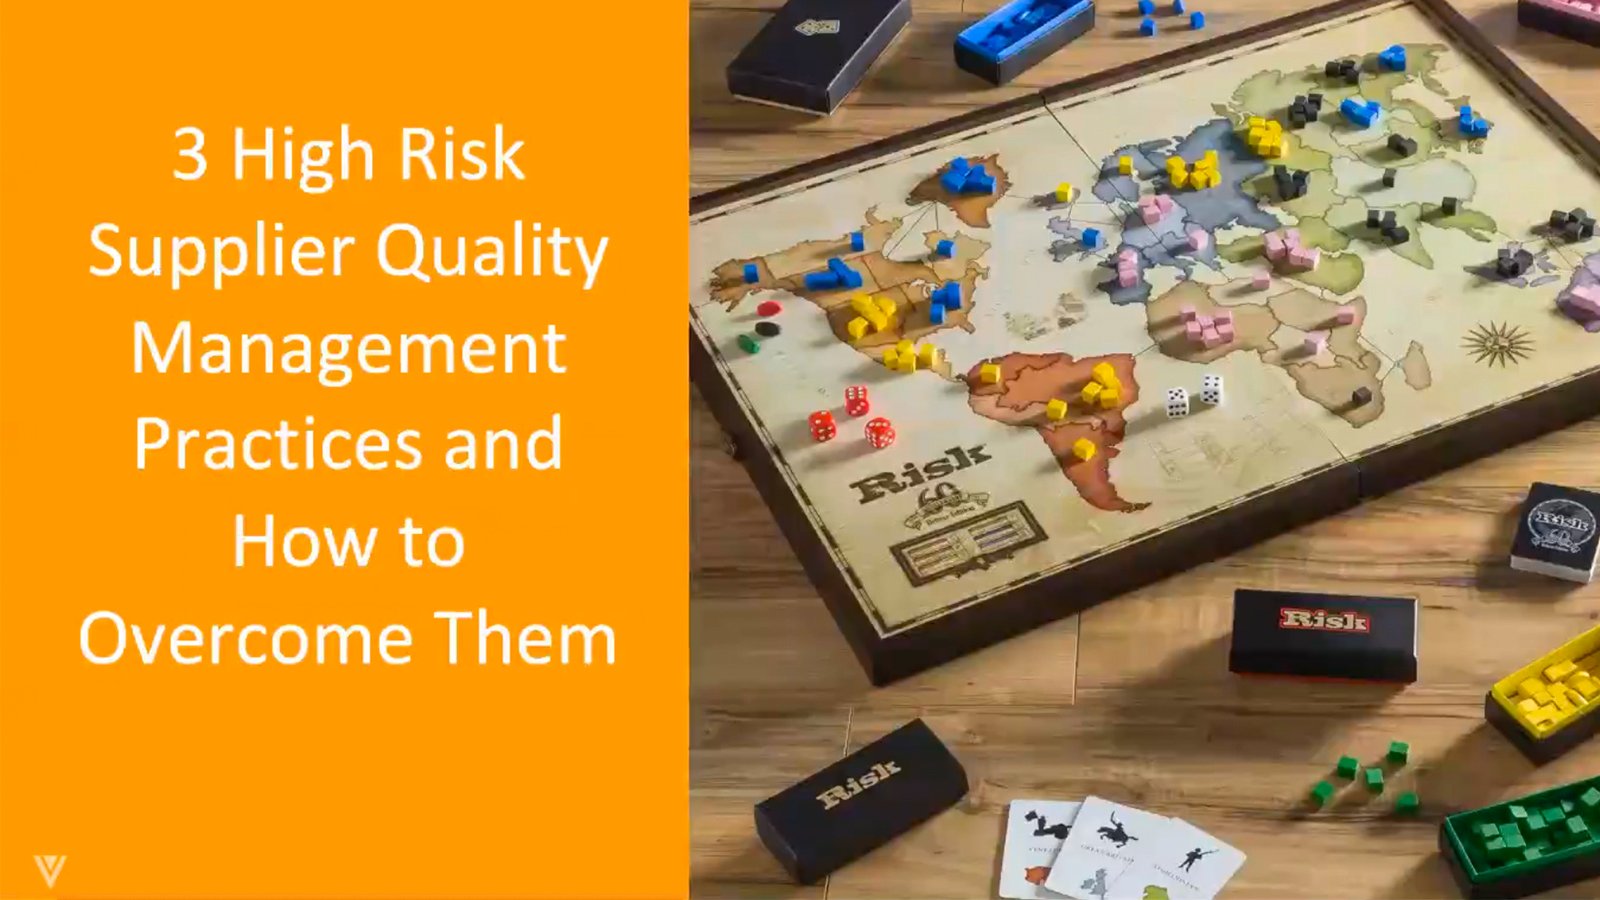 3 High Risk Supplier Quality Management Practices and How to Overcome Them